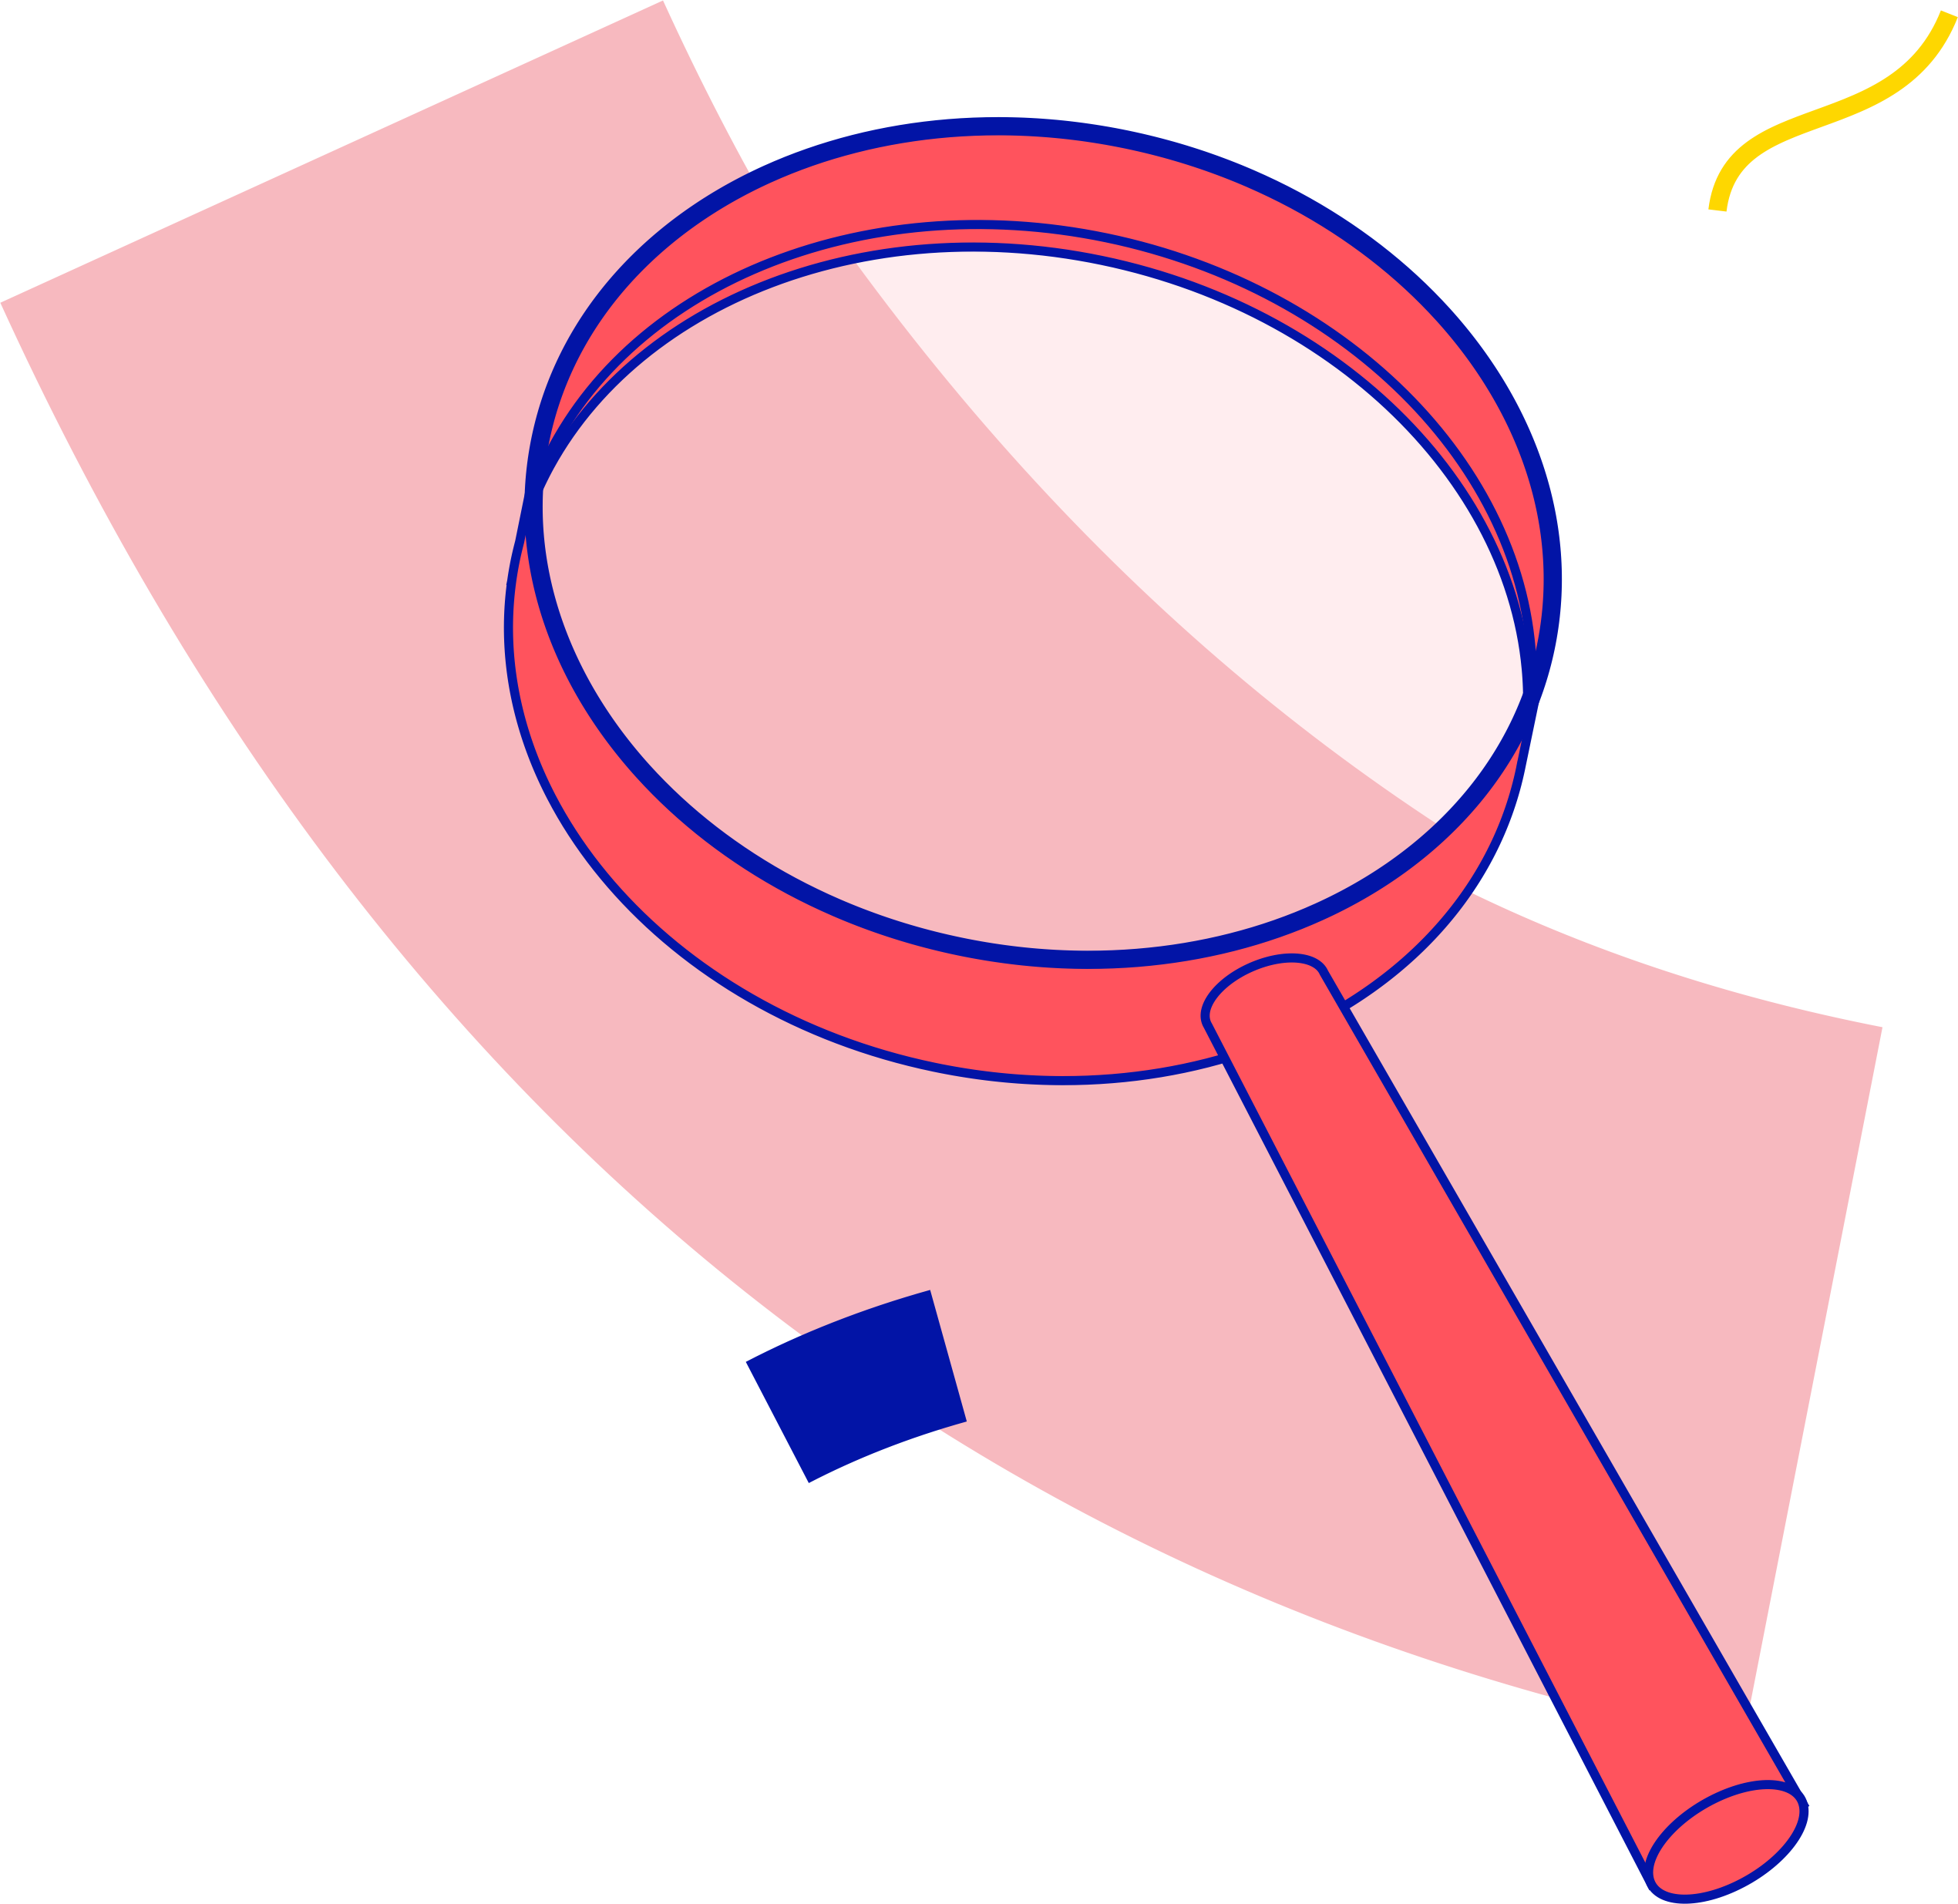 illustration of a magnifying glass on graphic figures symbolizing the search Promotion Strategy